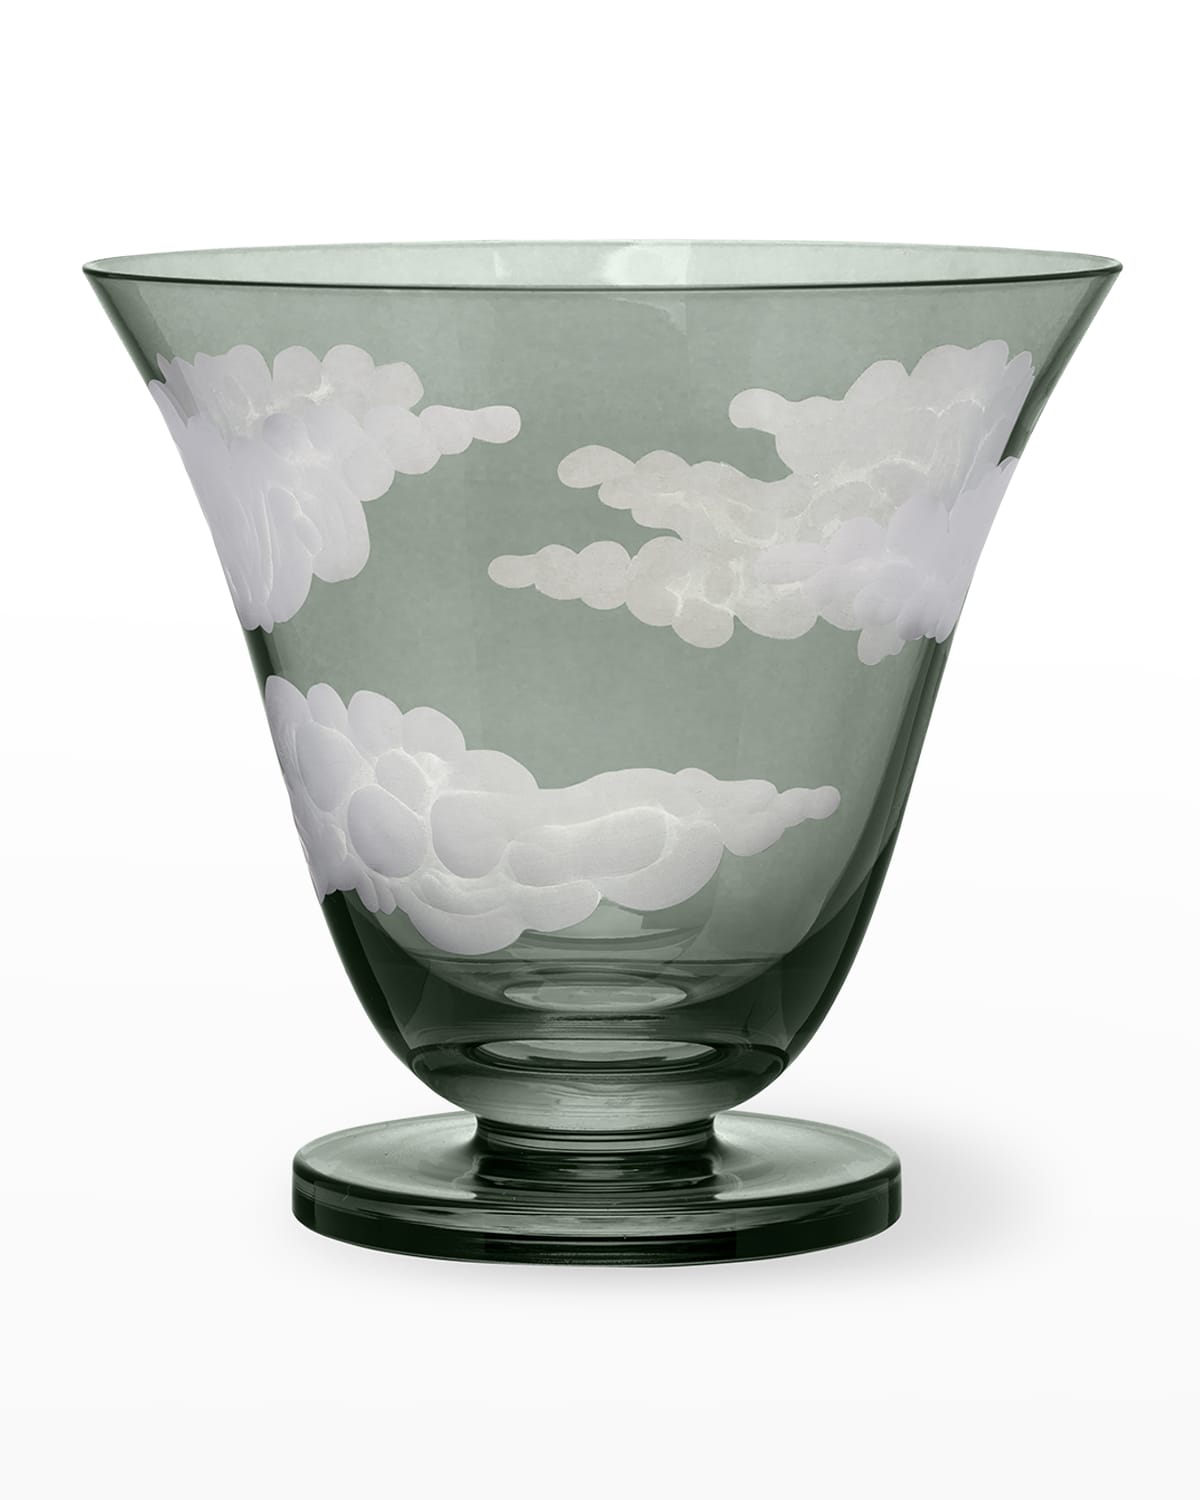 In The Clouds Stemless Wine Glass, Gray - 8 oz.